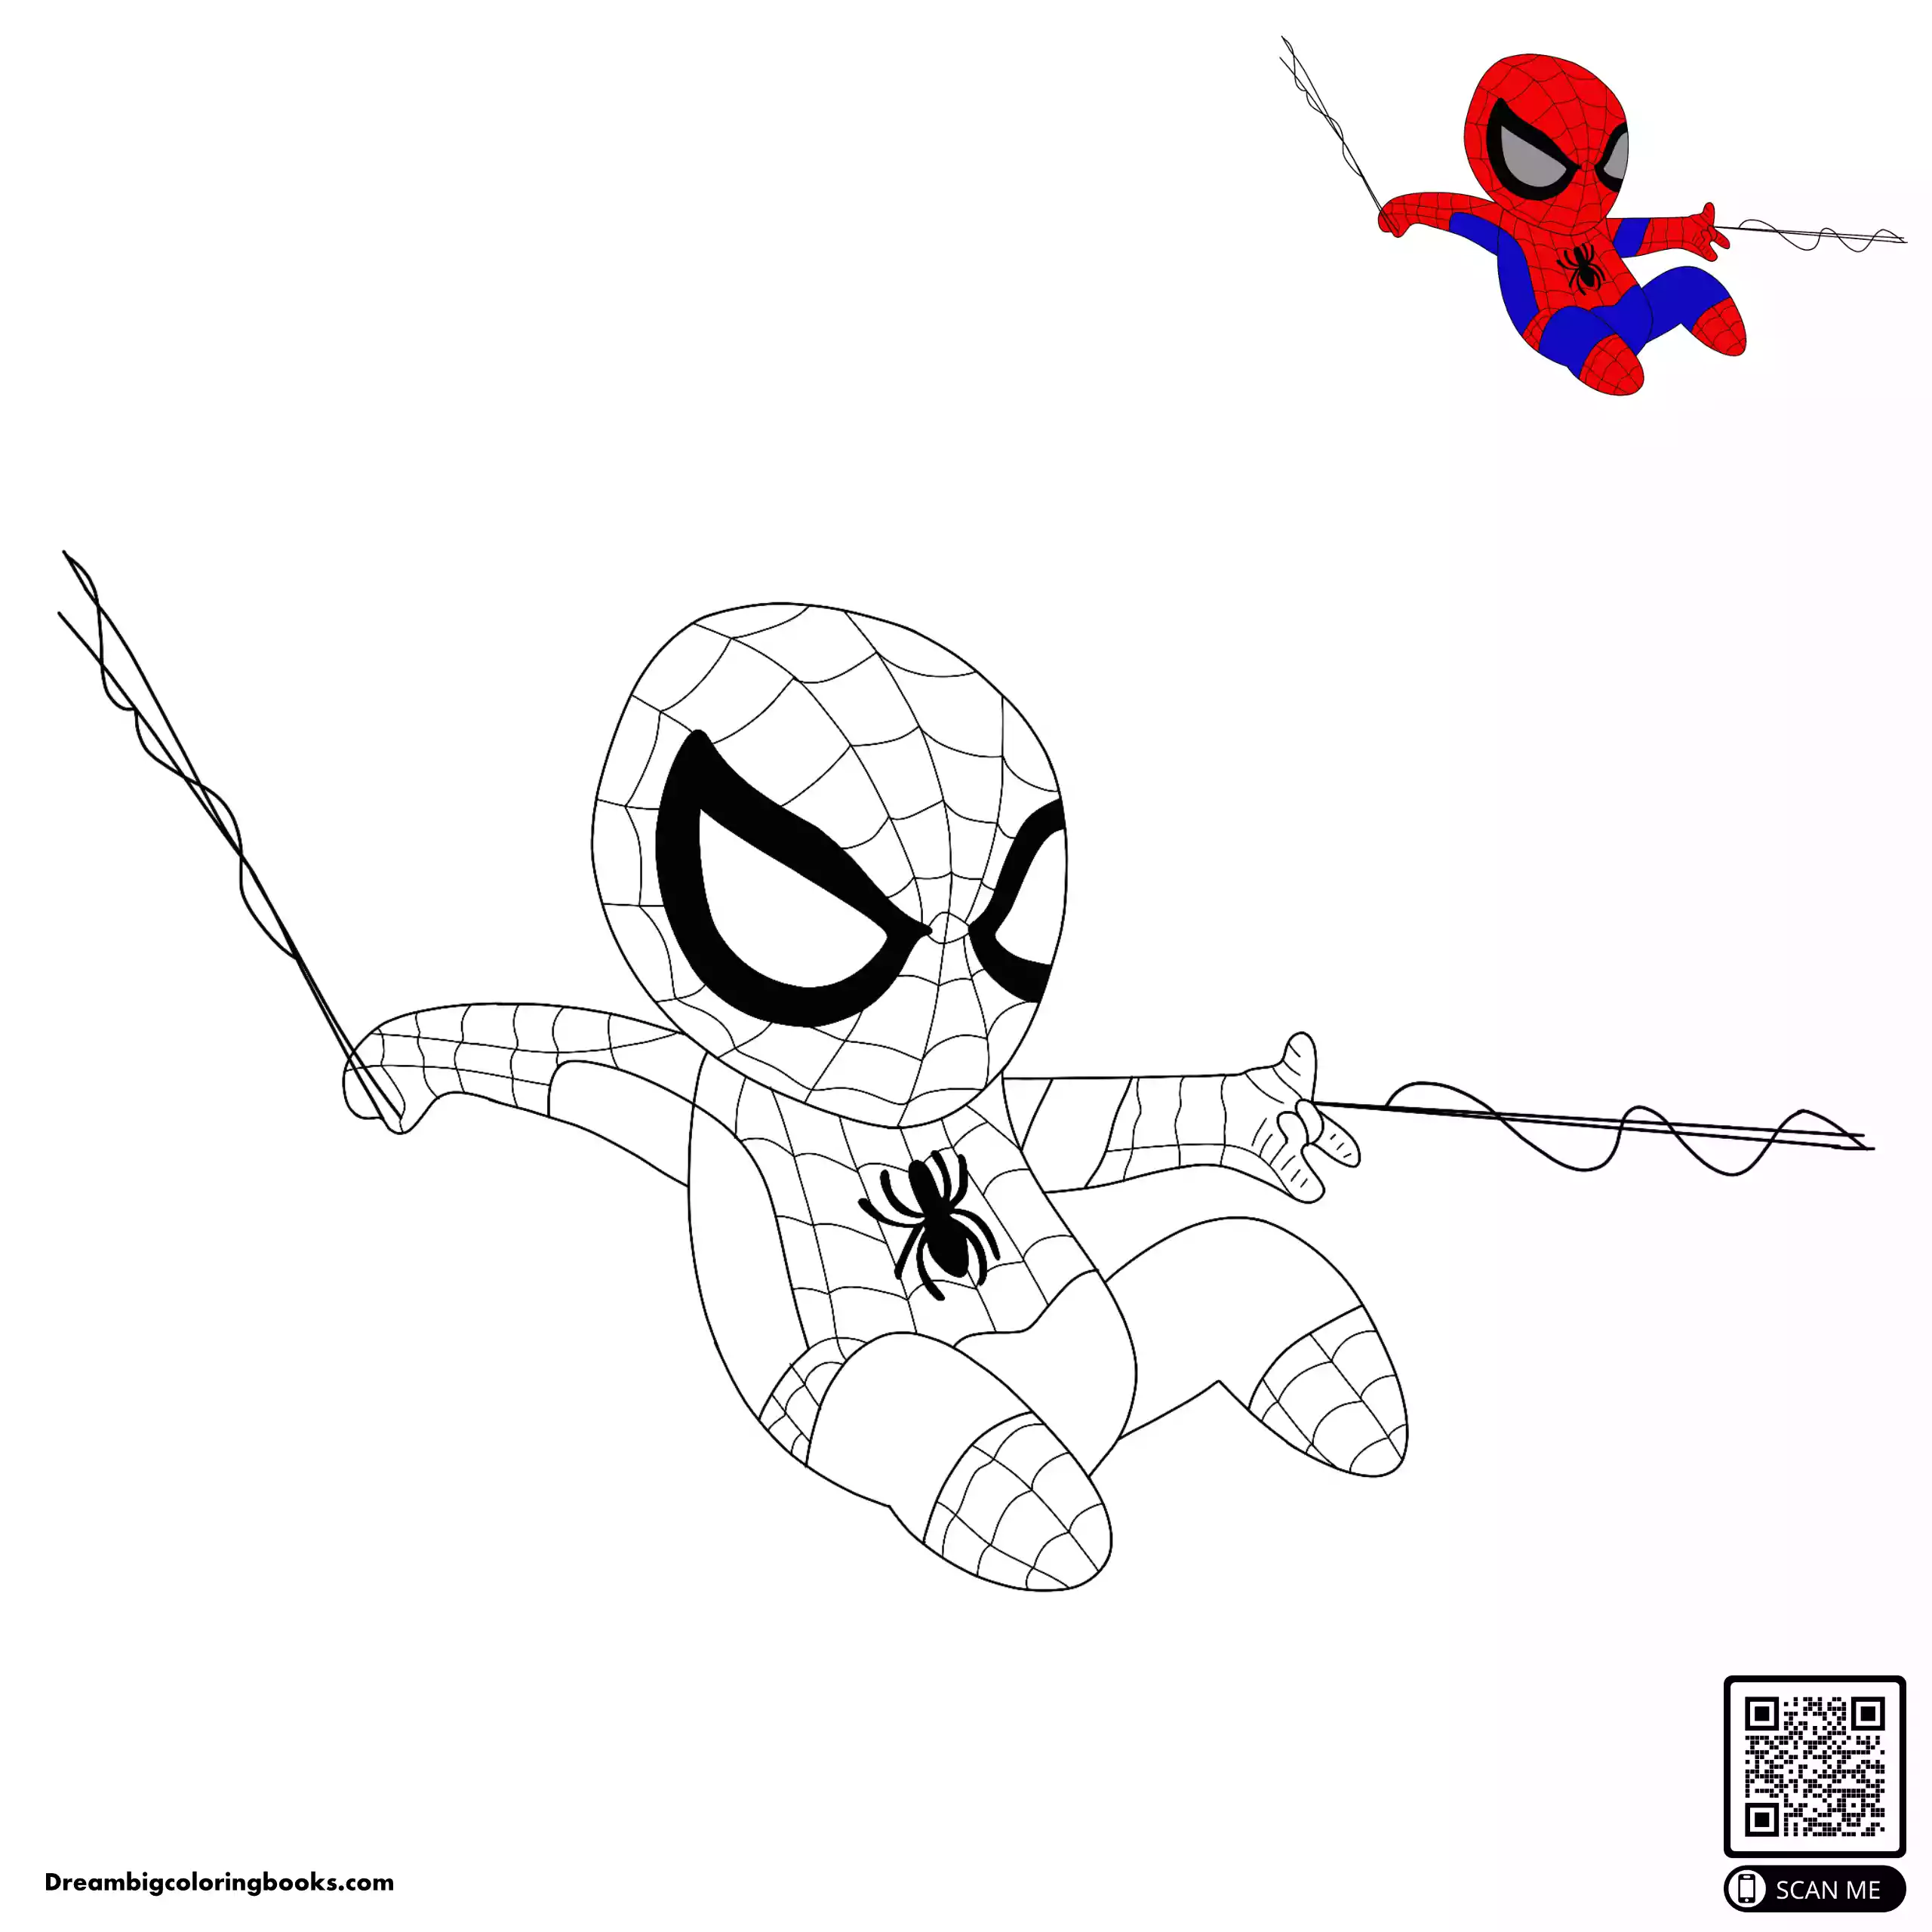 Easy Spiderman coloring sheet